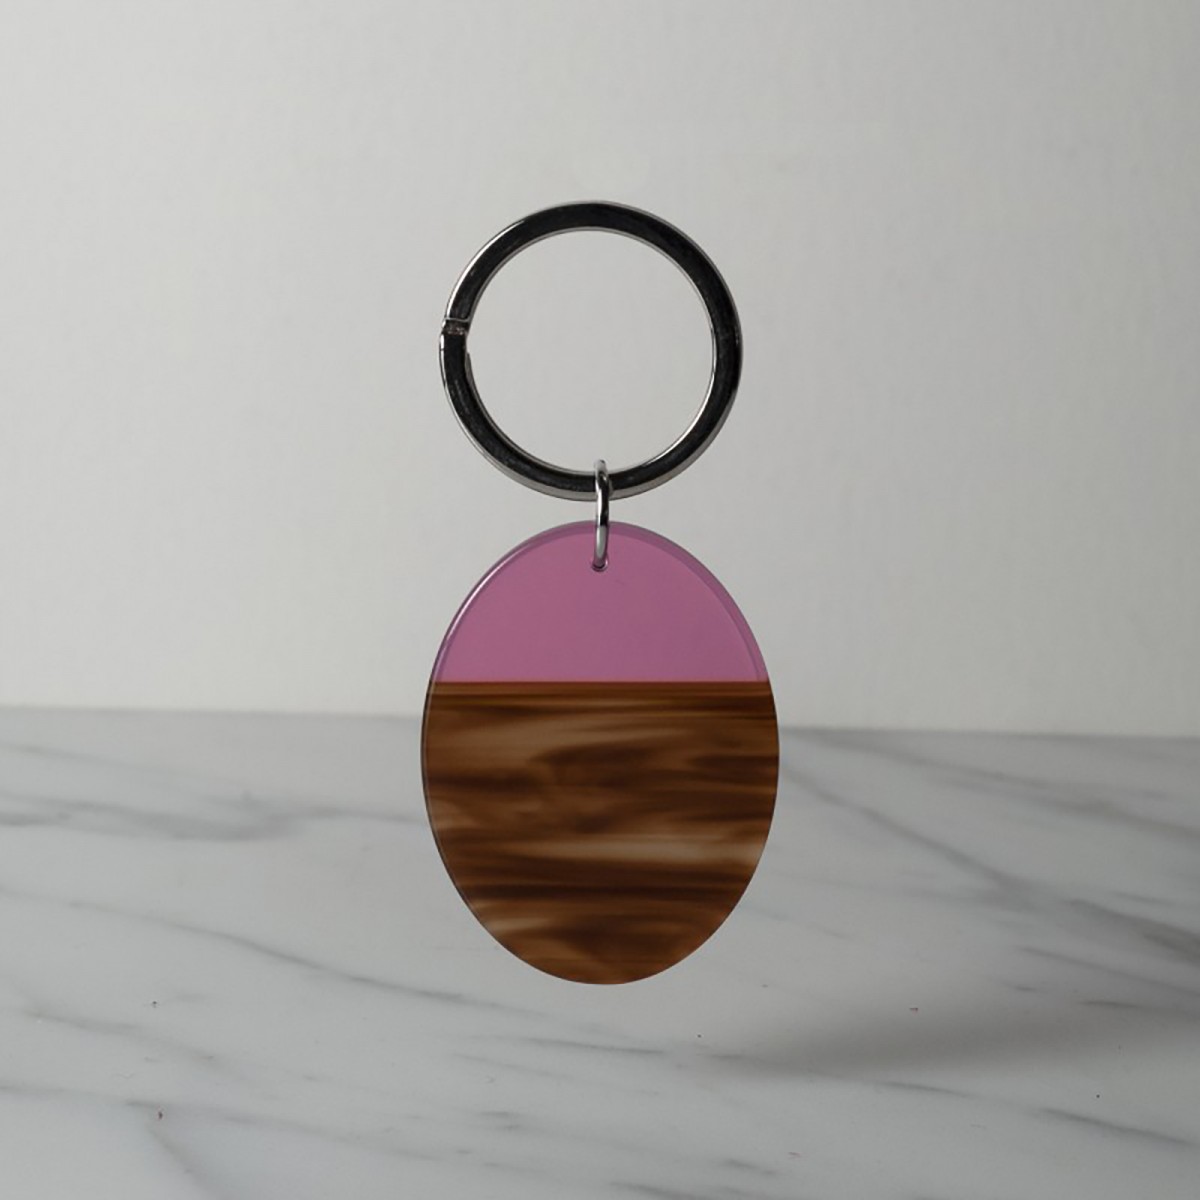 RETROUVE-MOI LARGE - Keyring in acetate handcrafted by Hervé Domar workshop